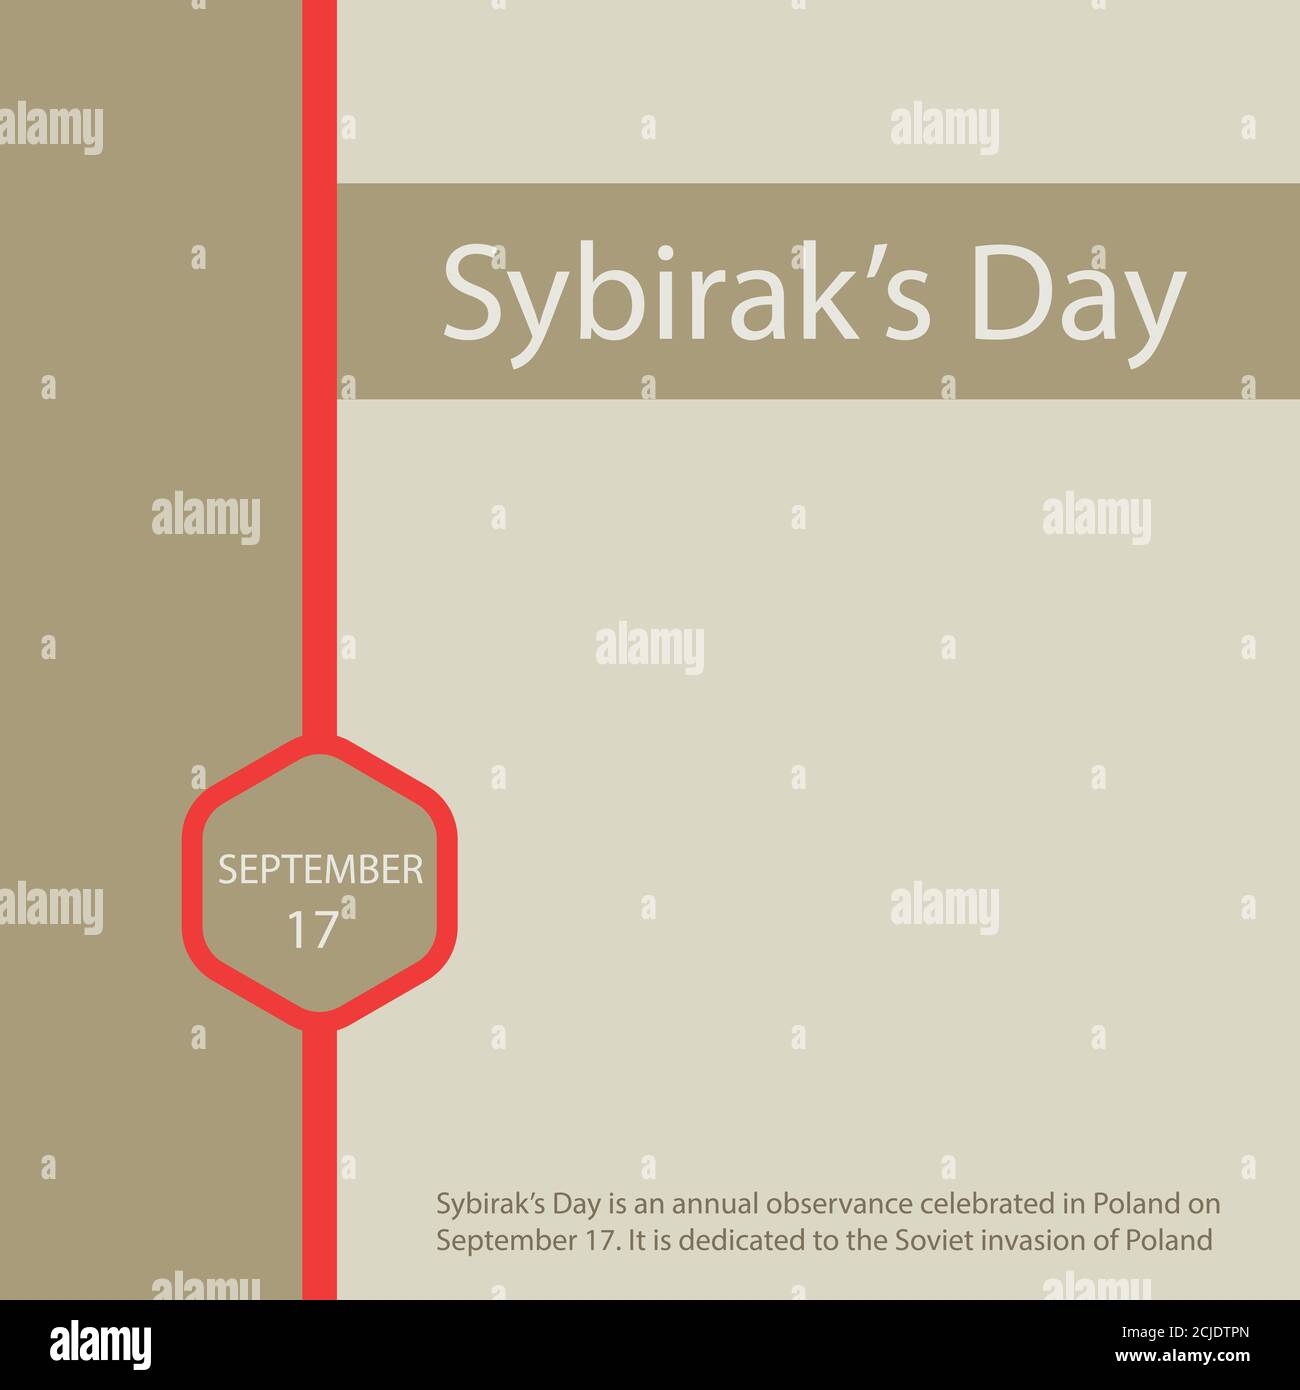 Sybirak’s Day is an annual observance celebrated in Poland on September 17. It is dedicated to the Soviet invasion of Poland. Stock Vector